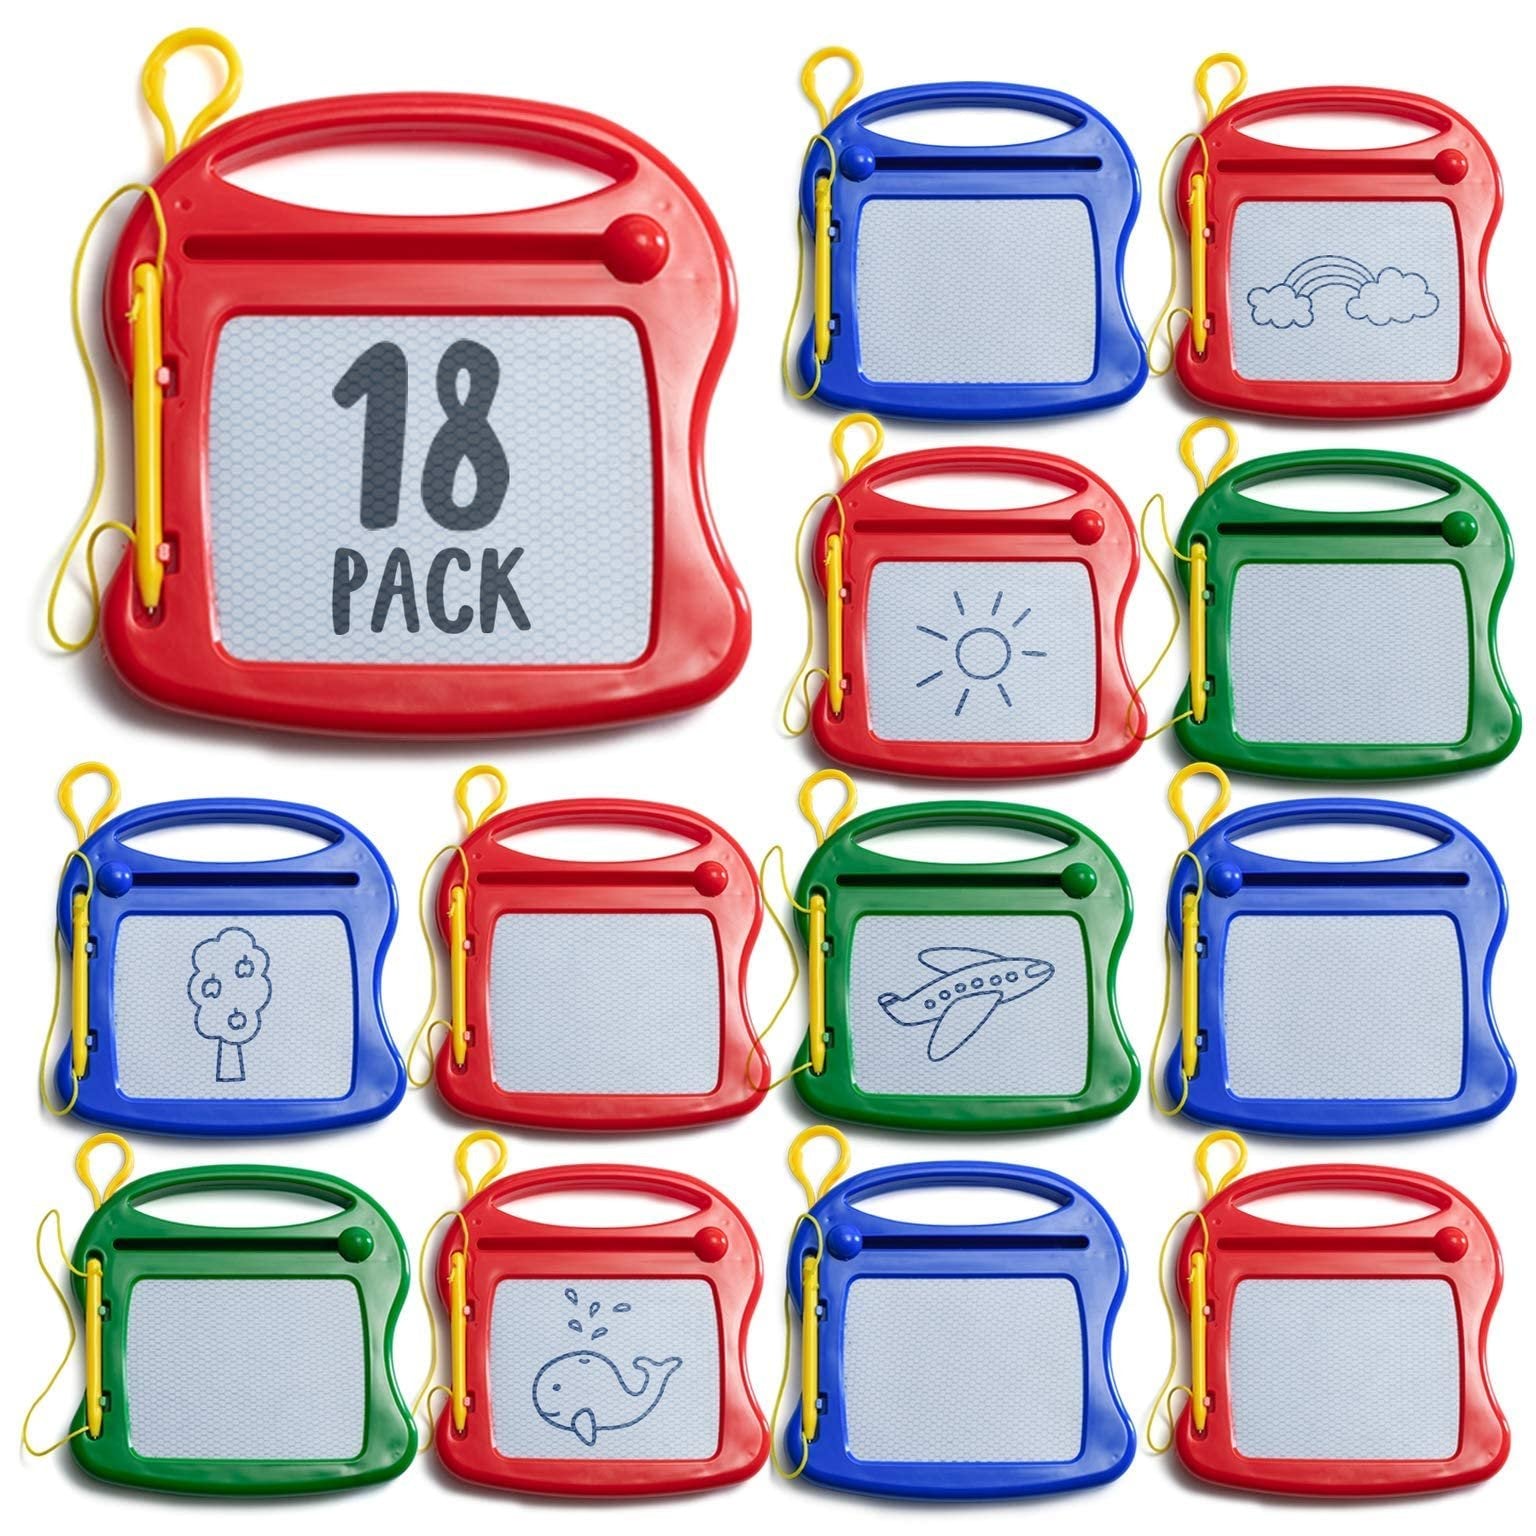 Prextex 36 Pack of Mini Magnetic Drawing Board for Kids - Mini Doodle Pad Bulk Toys for Party Favors for Kids 4-8 and 8-12 - Classroom Prizes, Goodie Bags for Kids Birthday Party